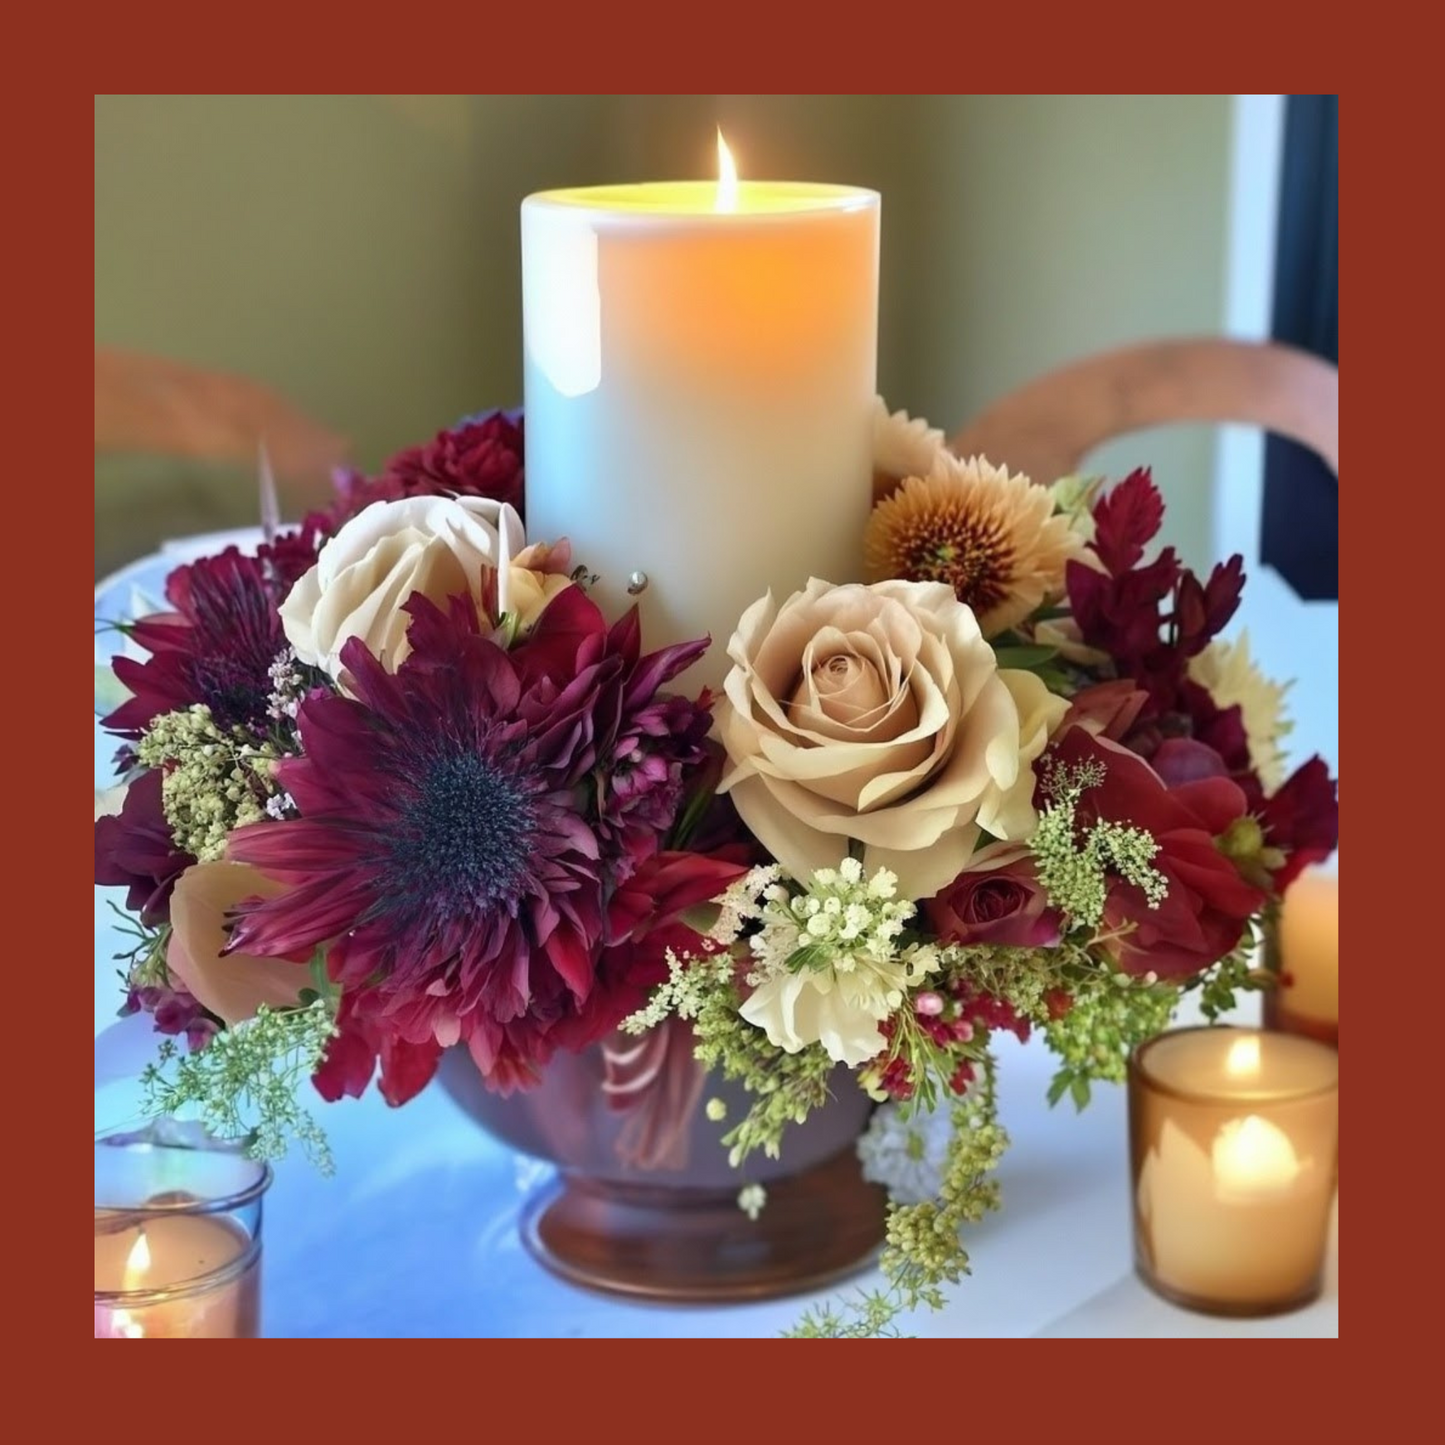 Thanksgiving Centerpiece "Candle "Lit" Glow" Flowers for Table